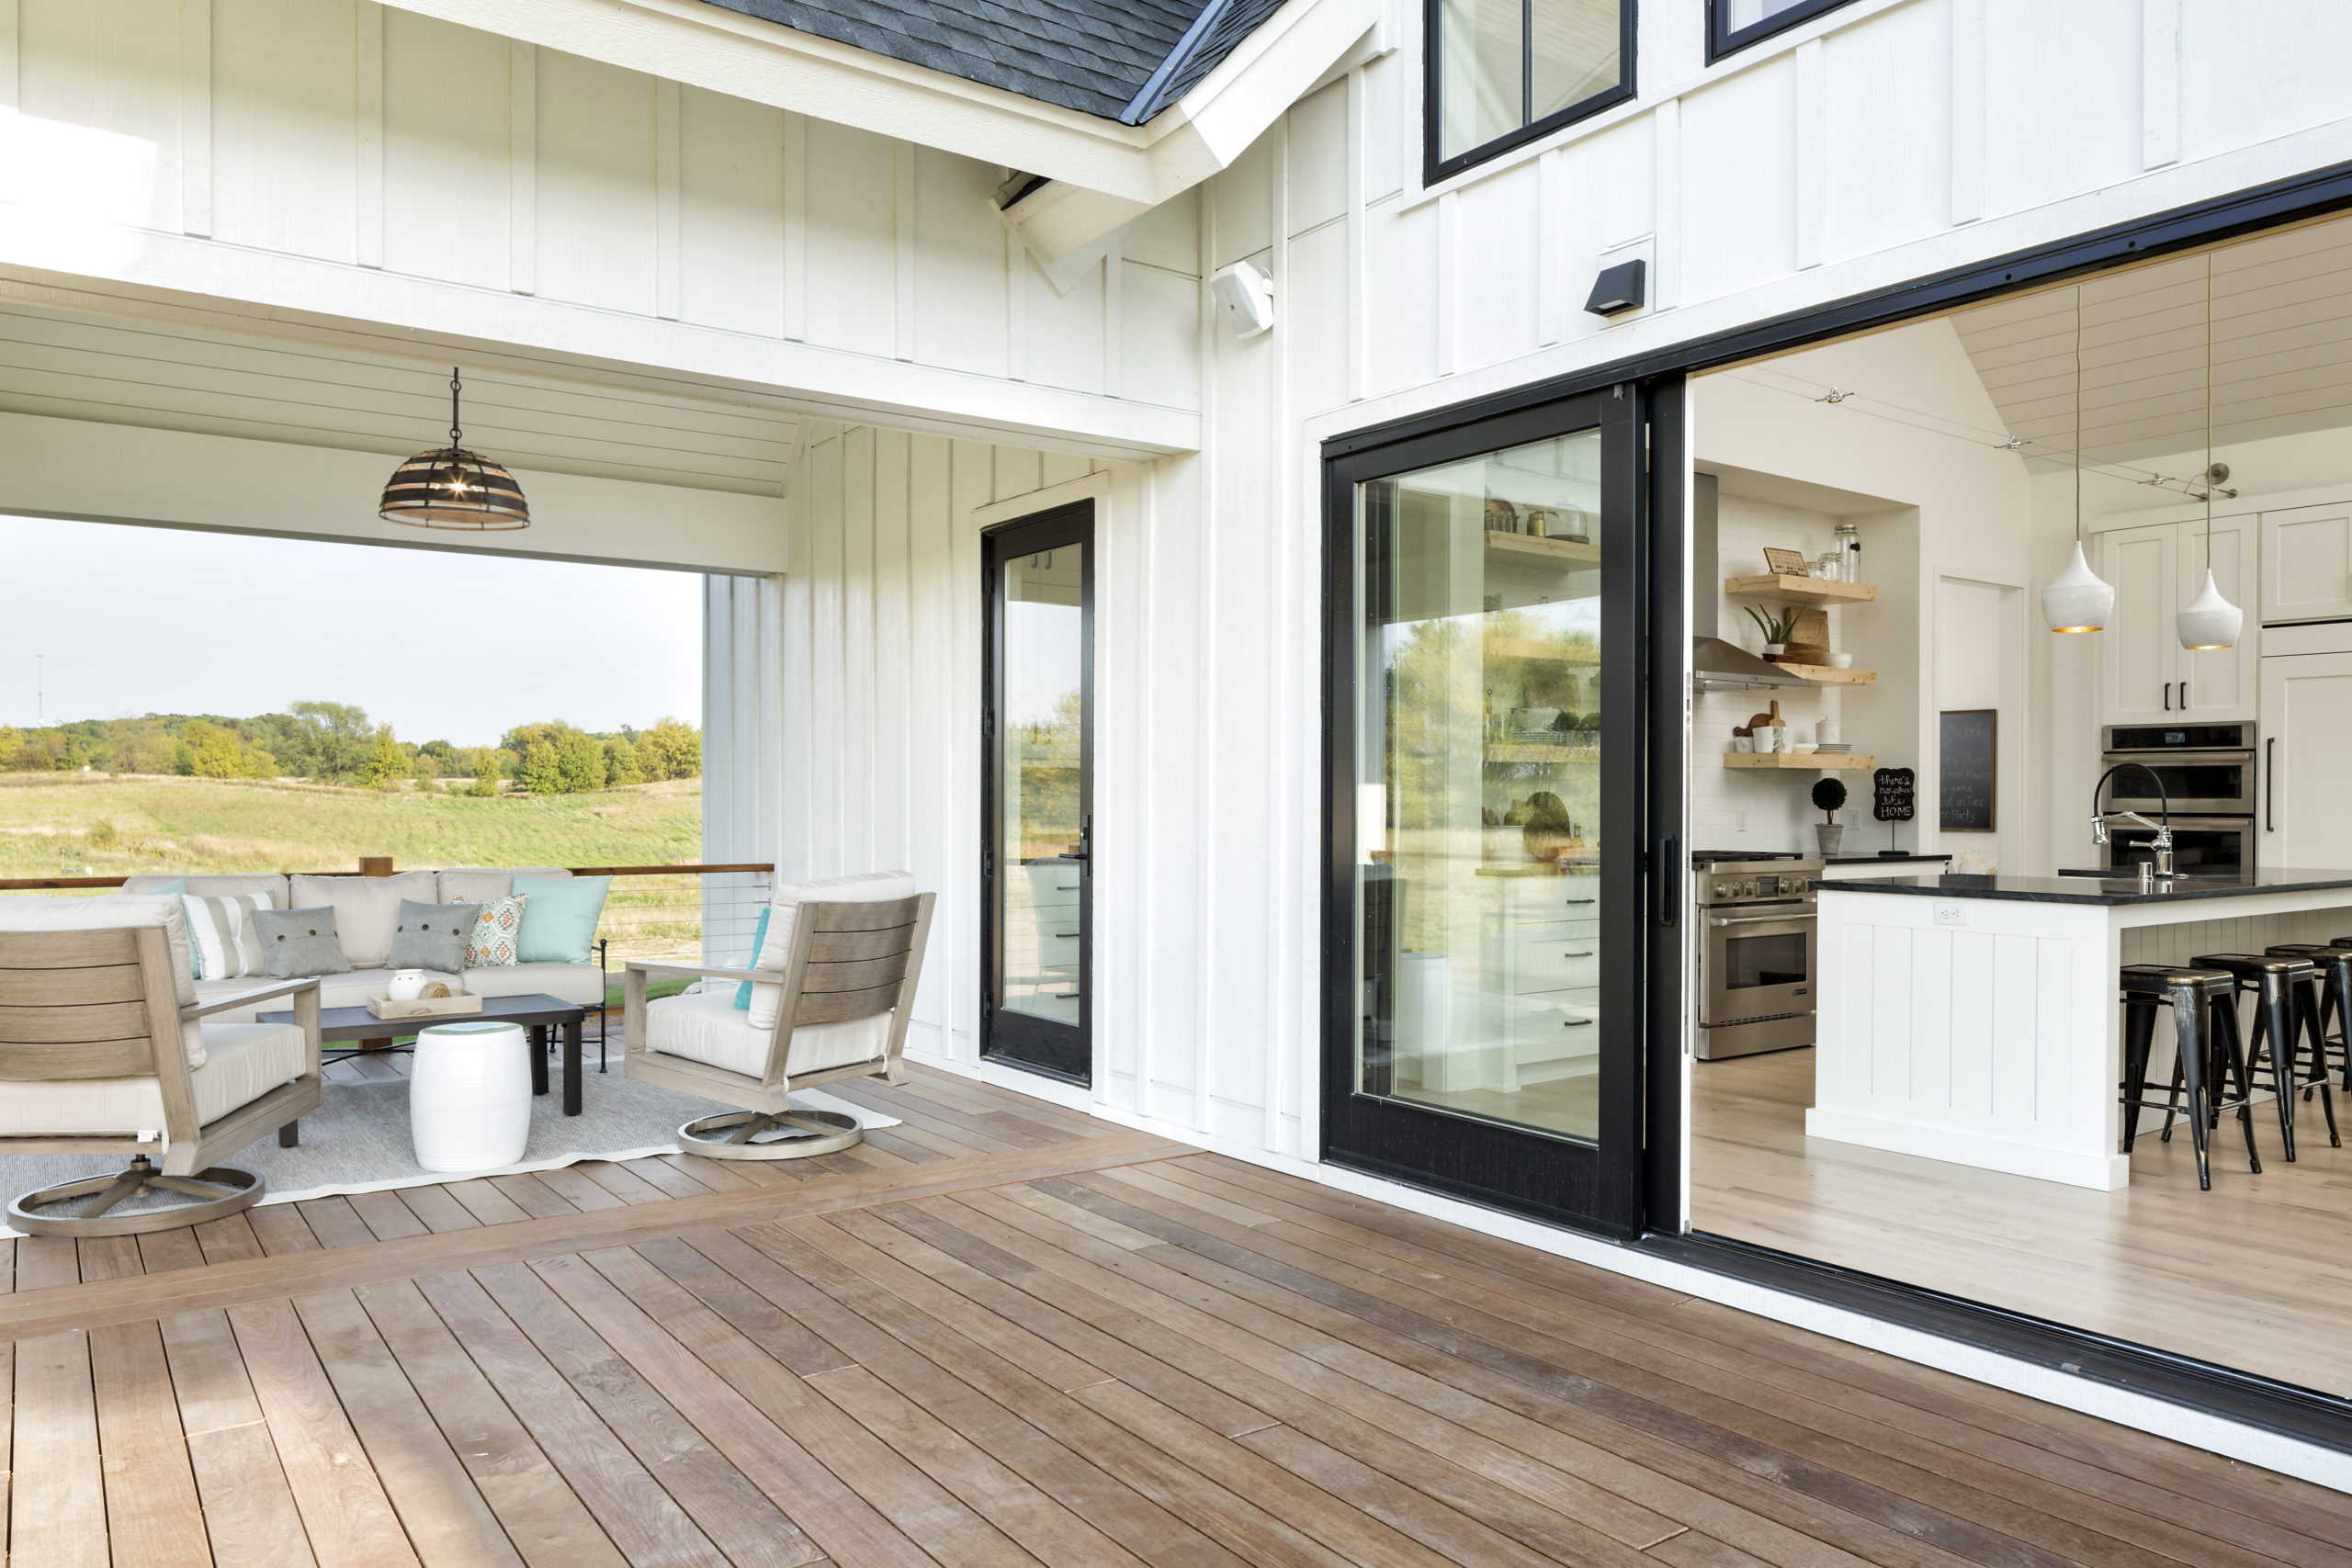 A white kitchen with a wooden deck and sliding glass doors.